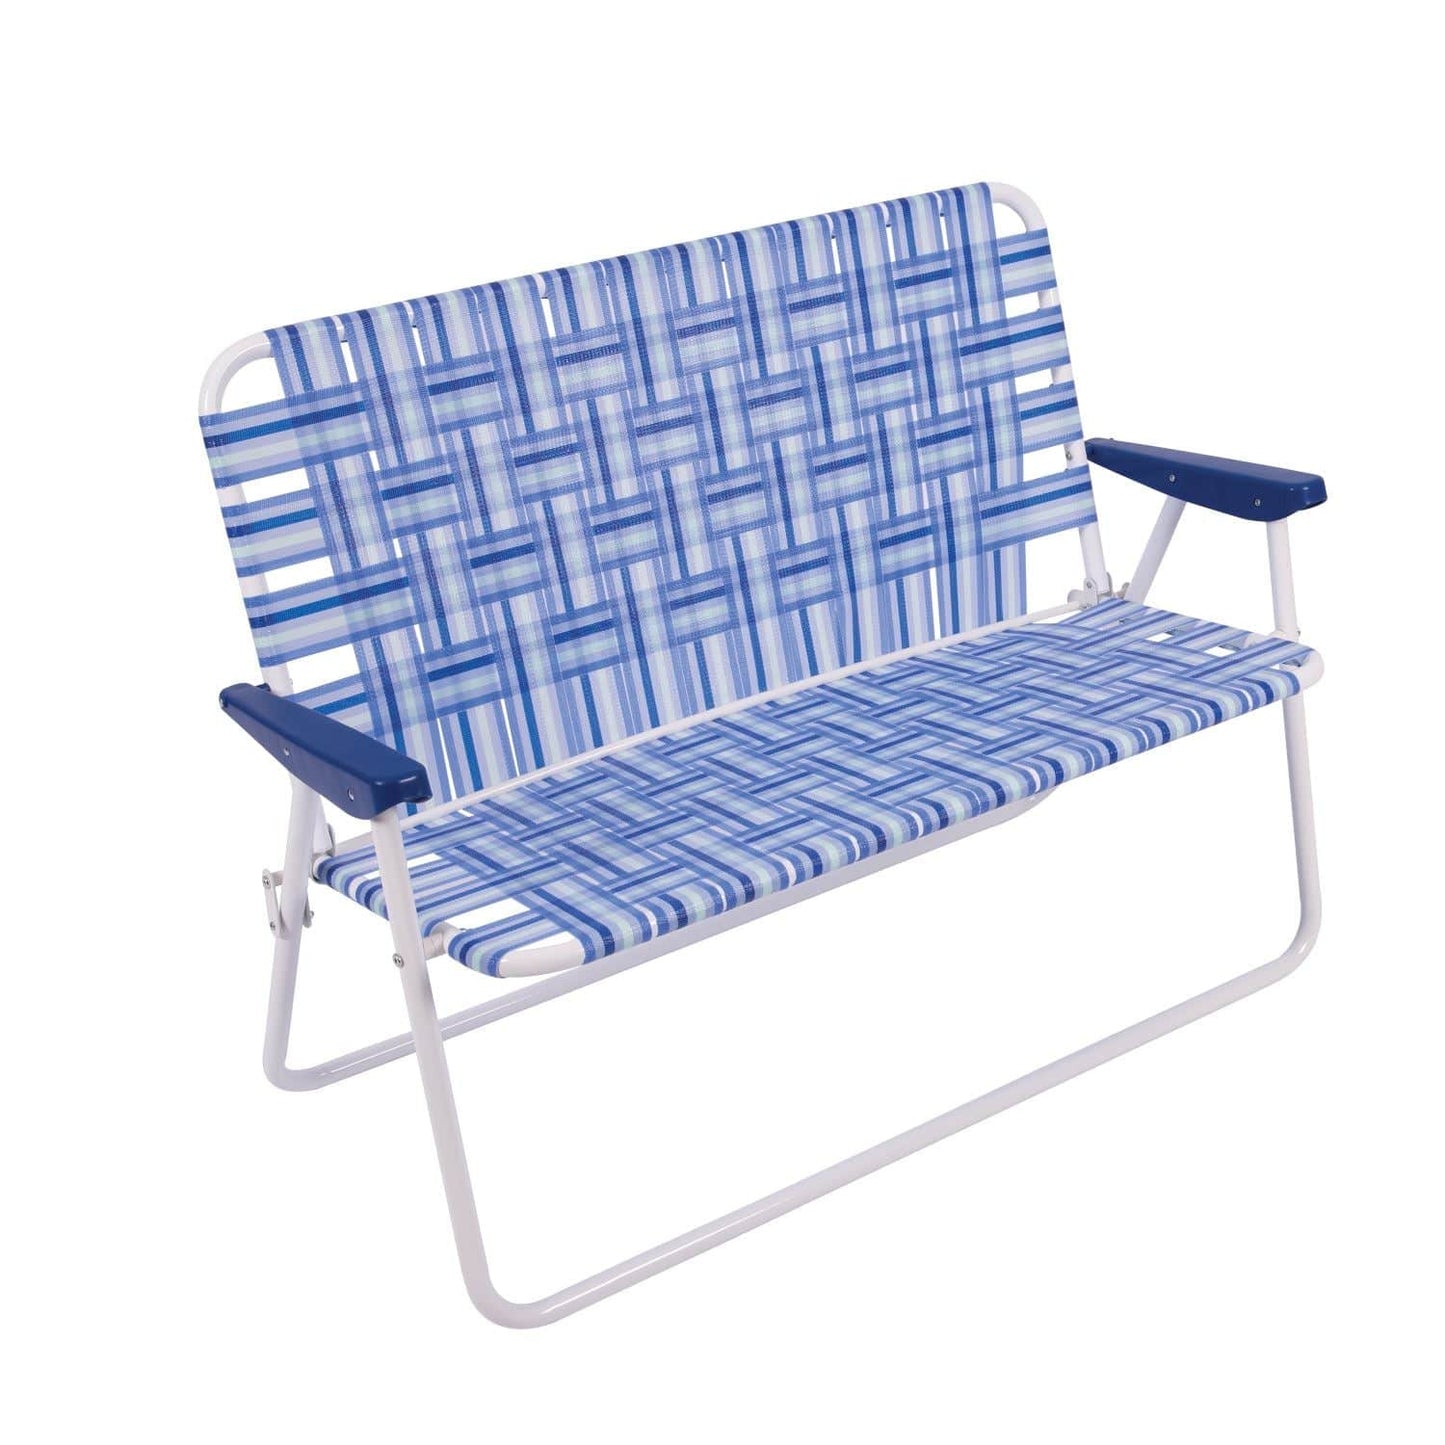 RIO Outdoor folding chair RIO | Web Loveseat BY058-0128-1